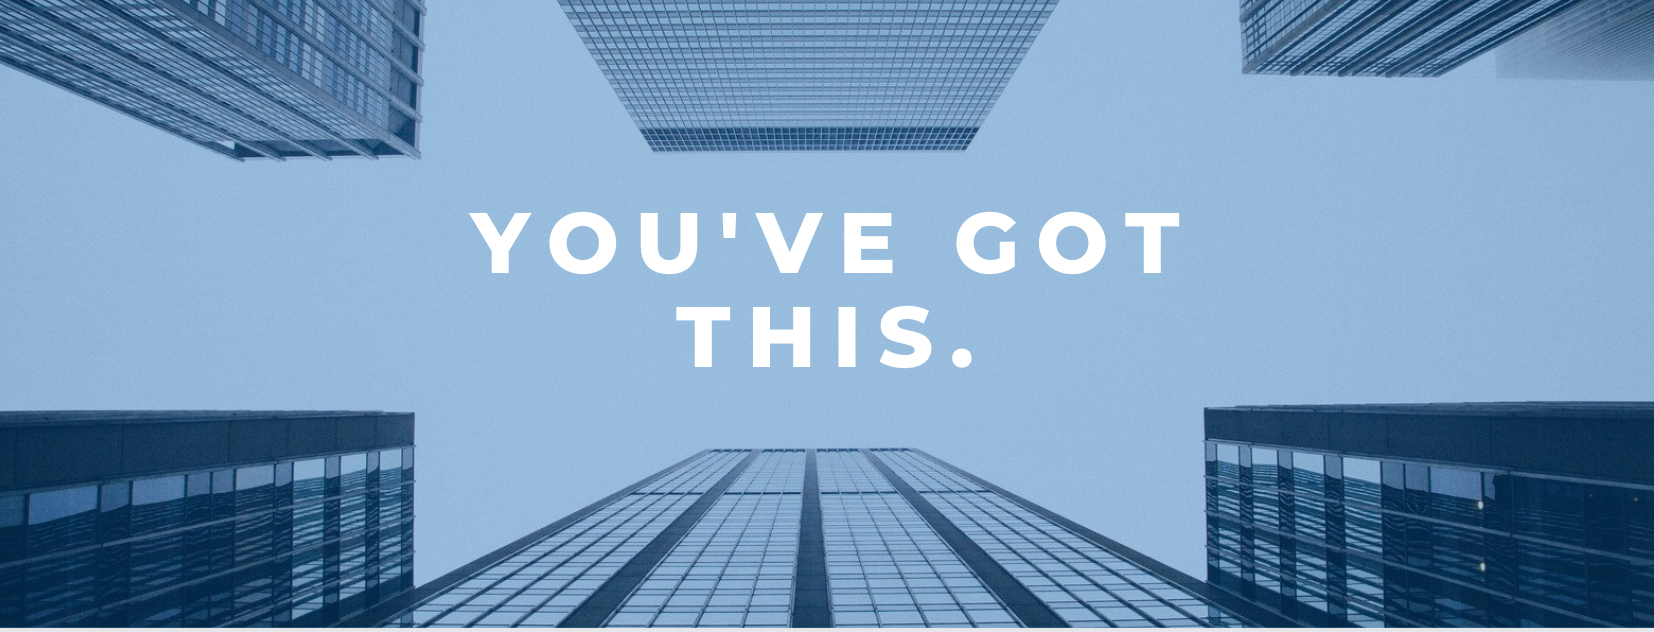 You’ve got this.